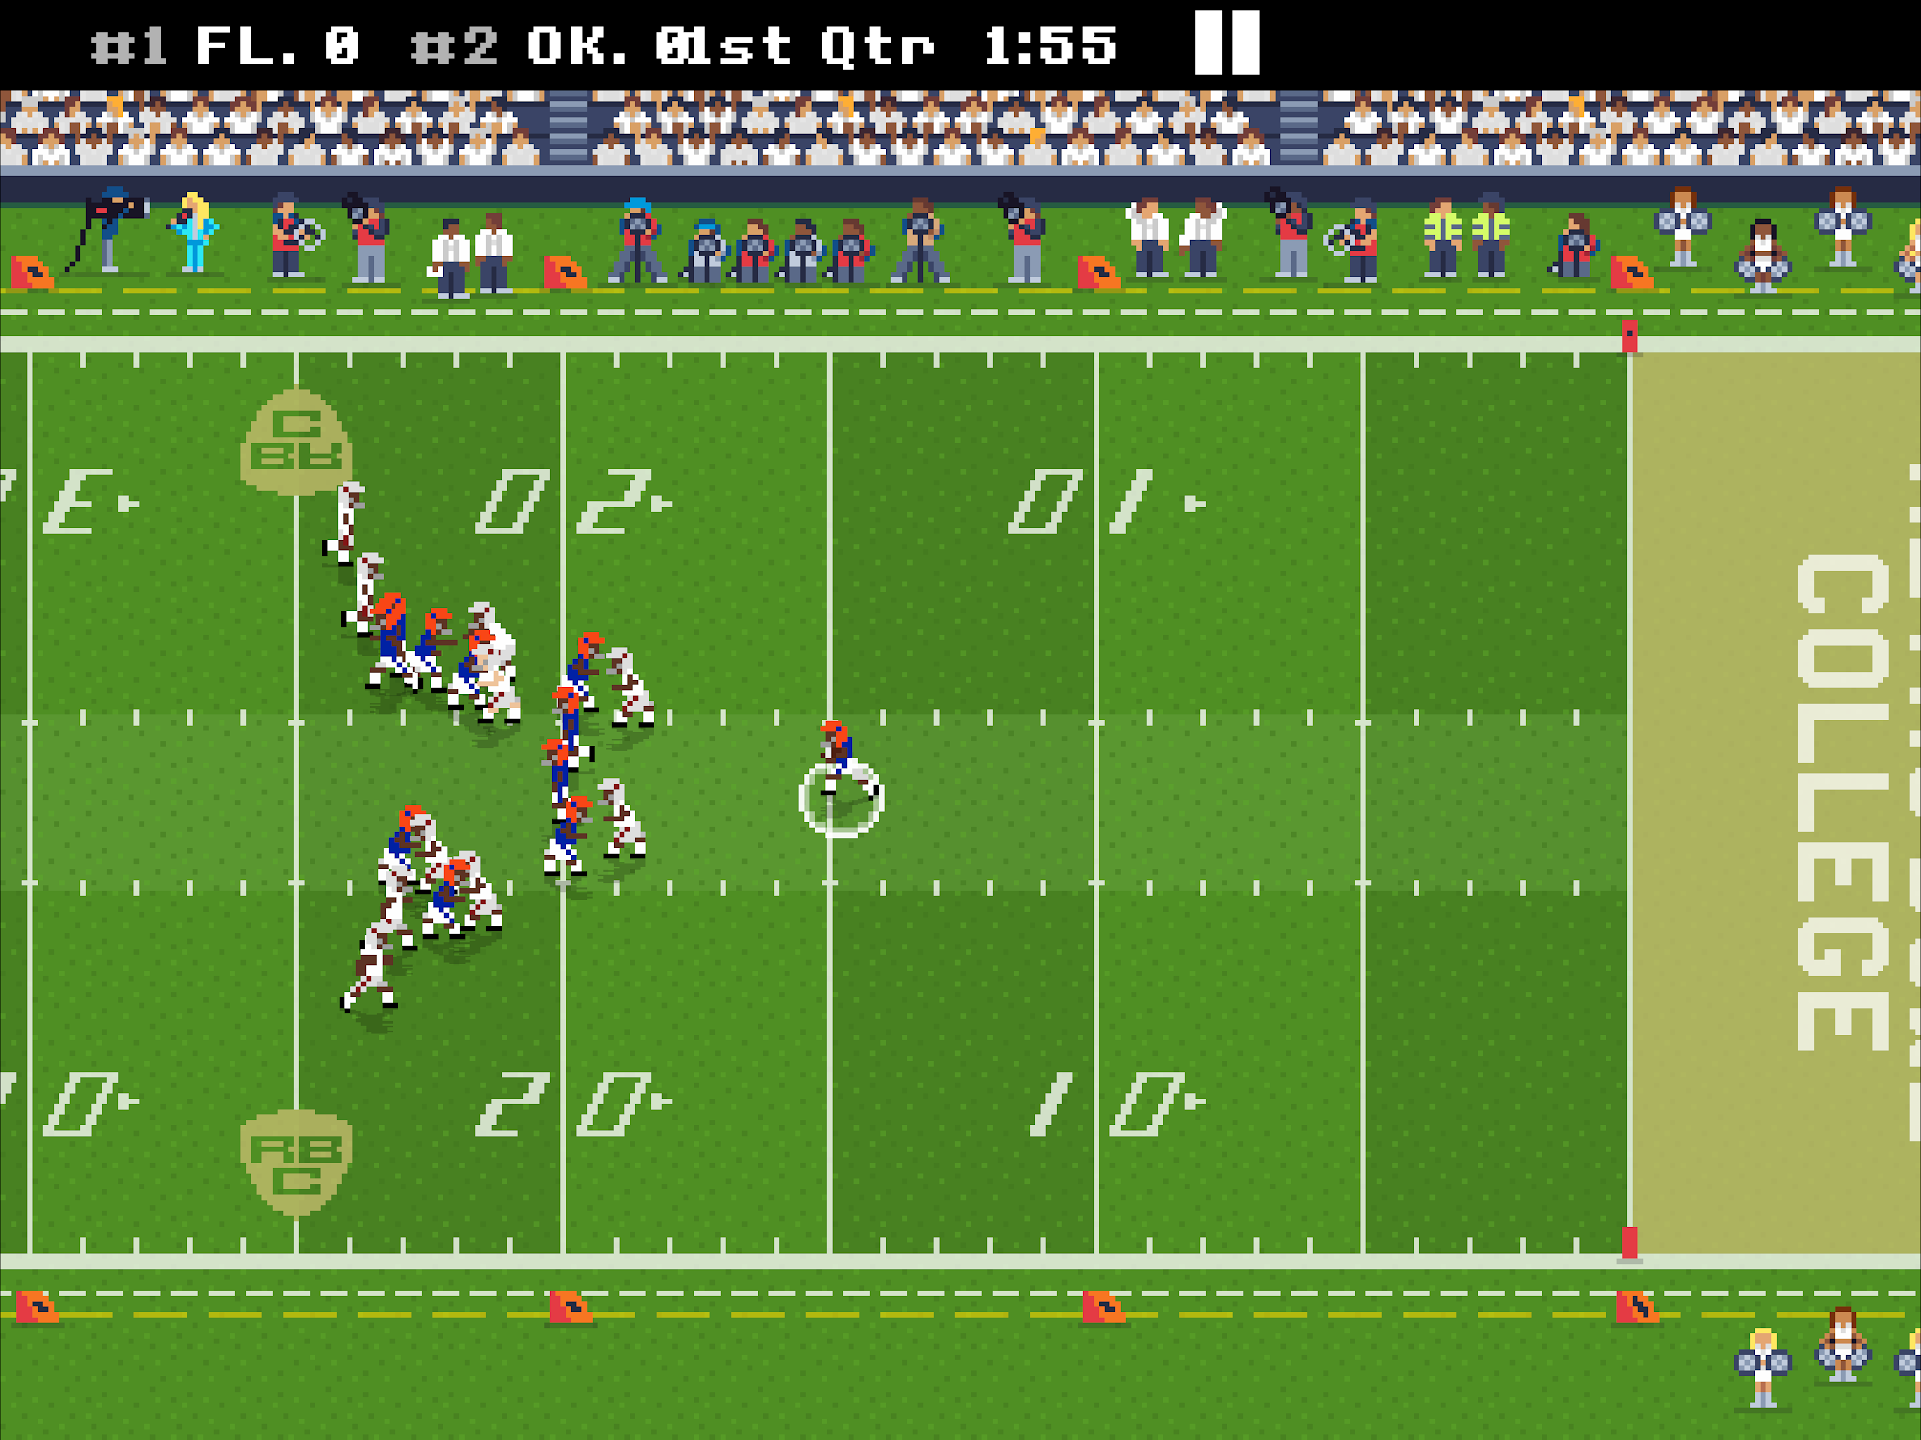 RETRO BOWL COLLEGE - Play Online for Free!